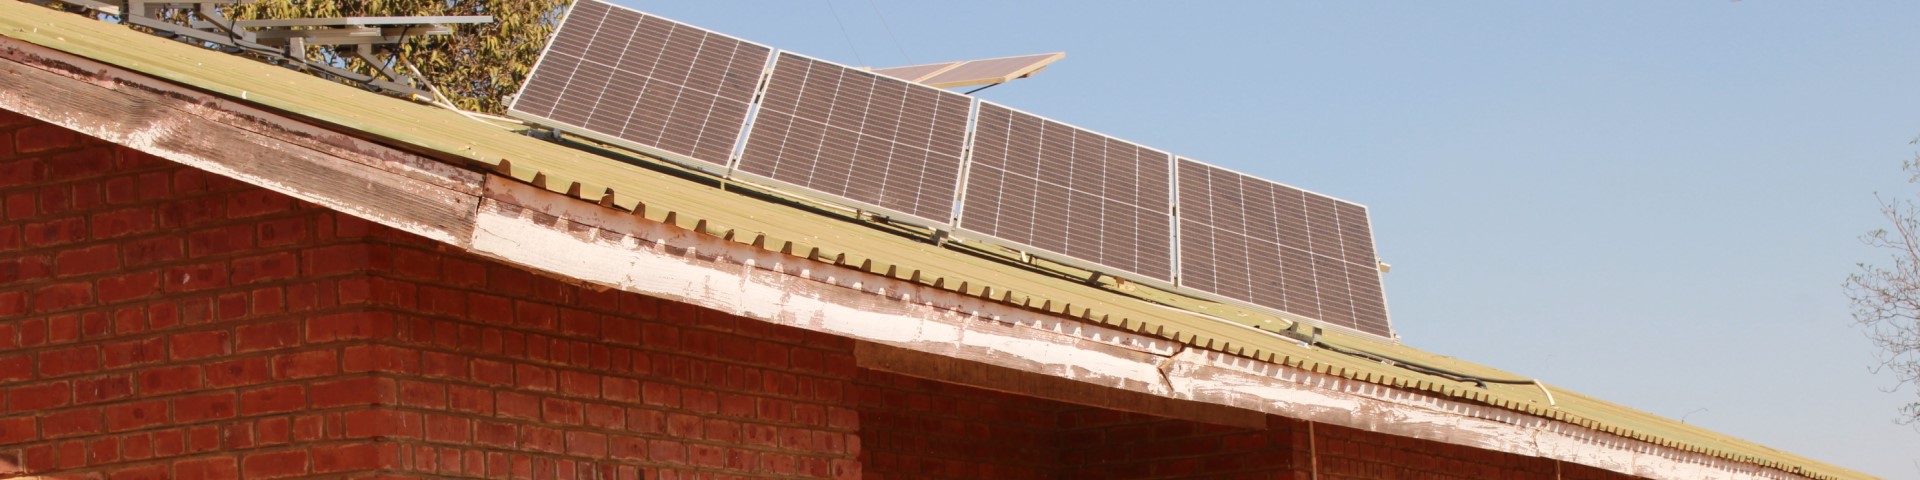 A rural building installed with solar power.